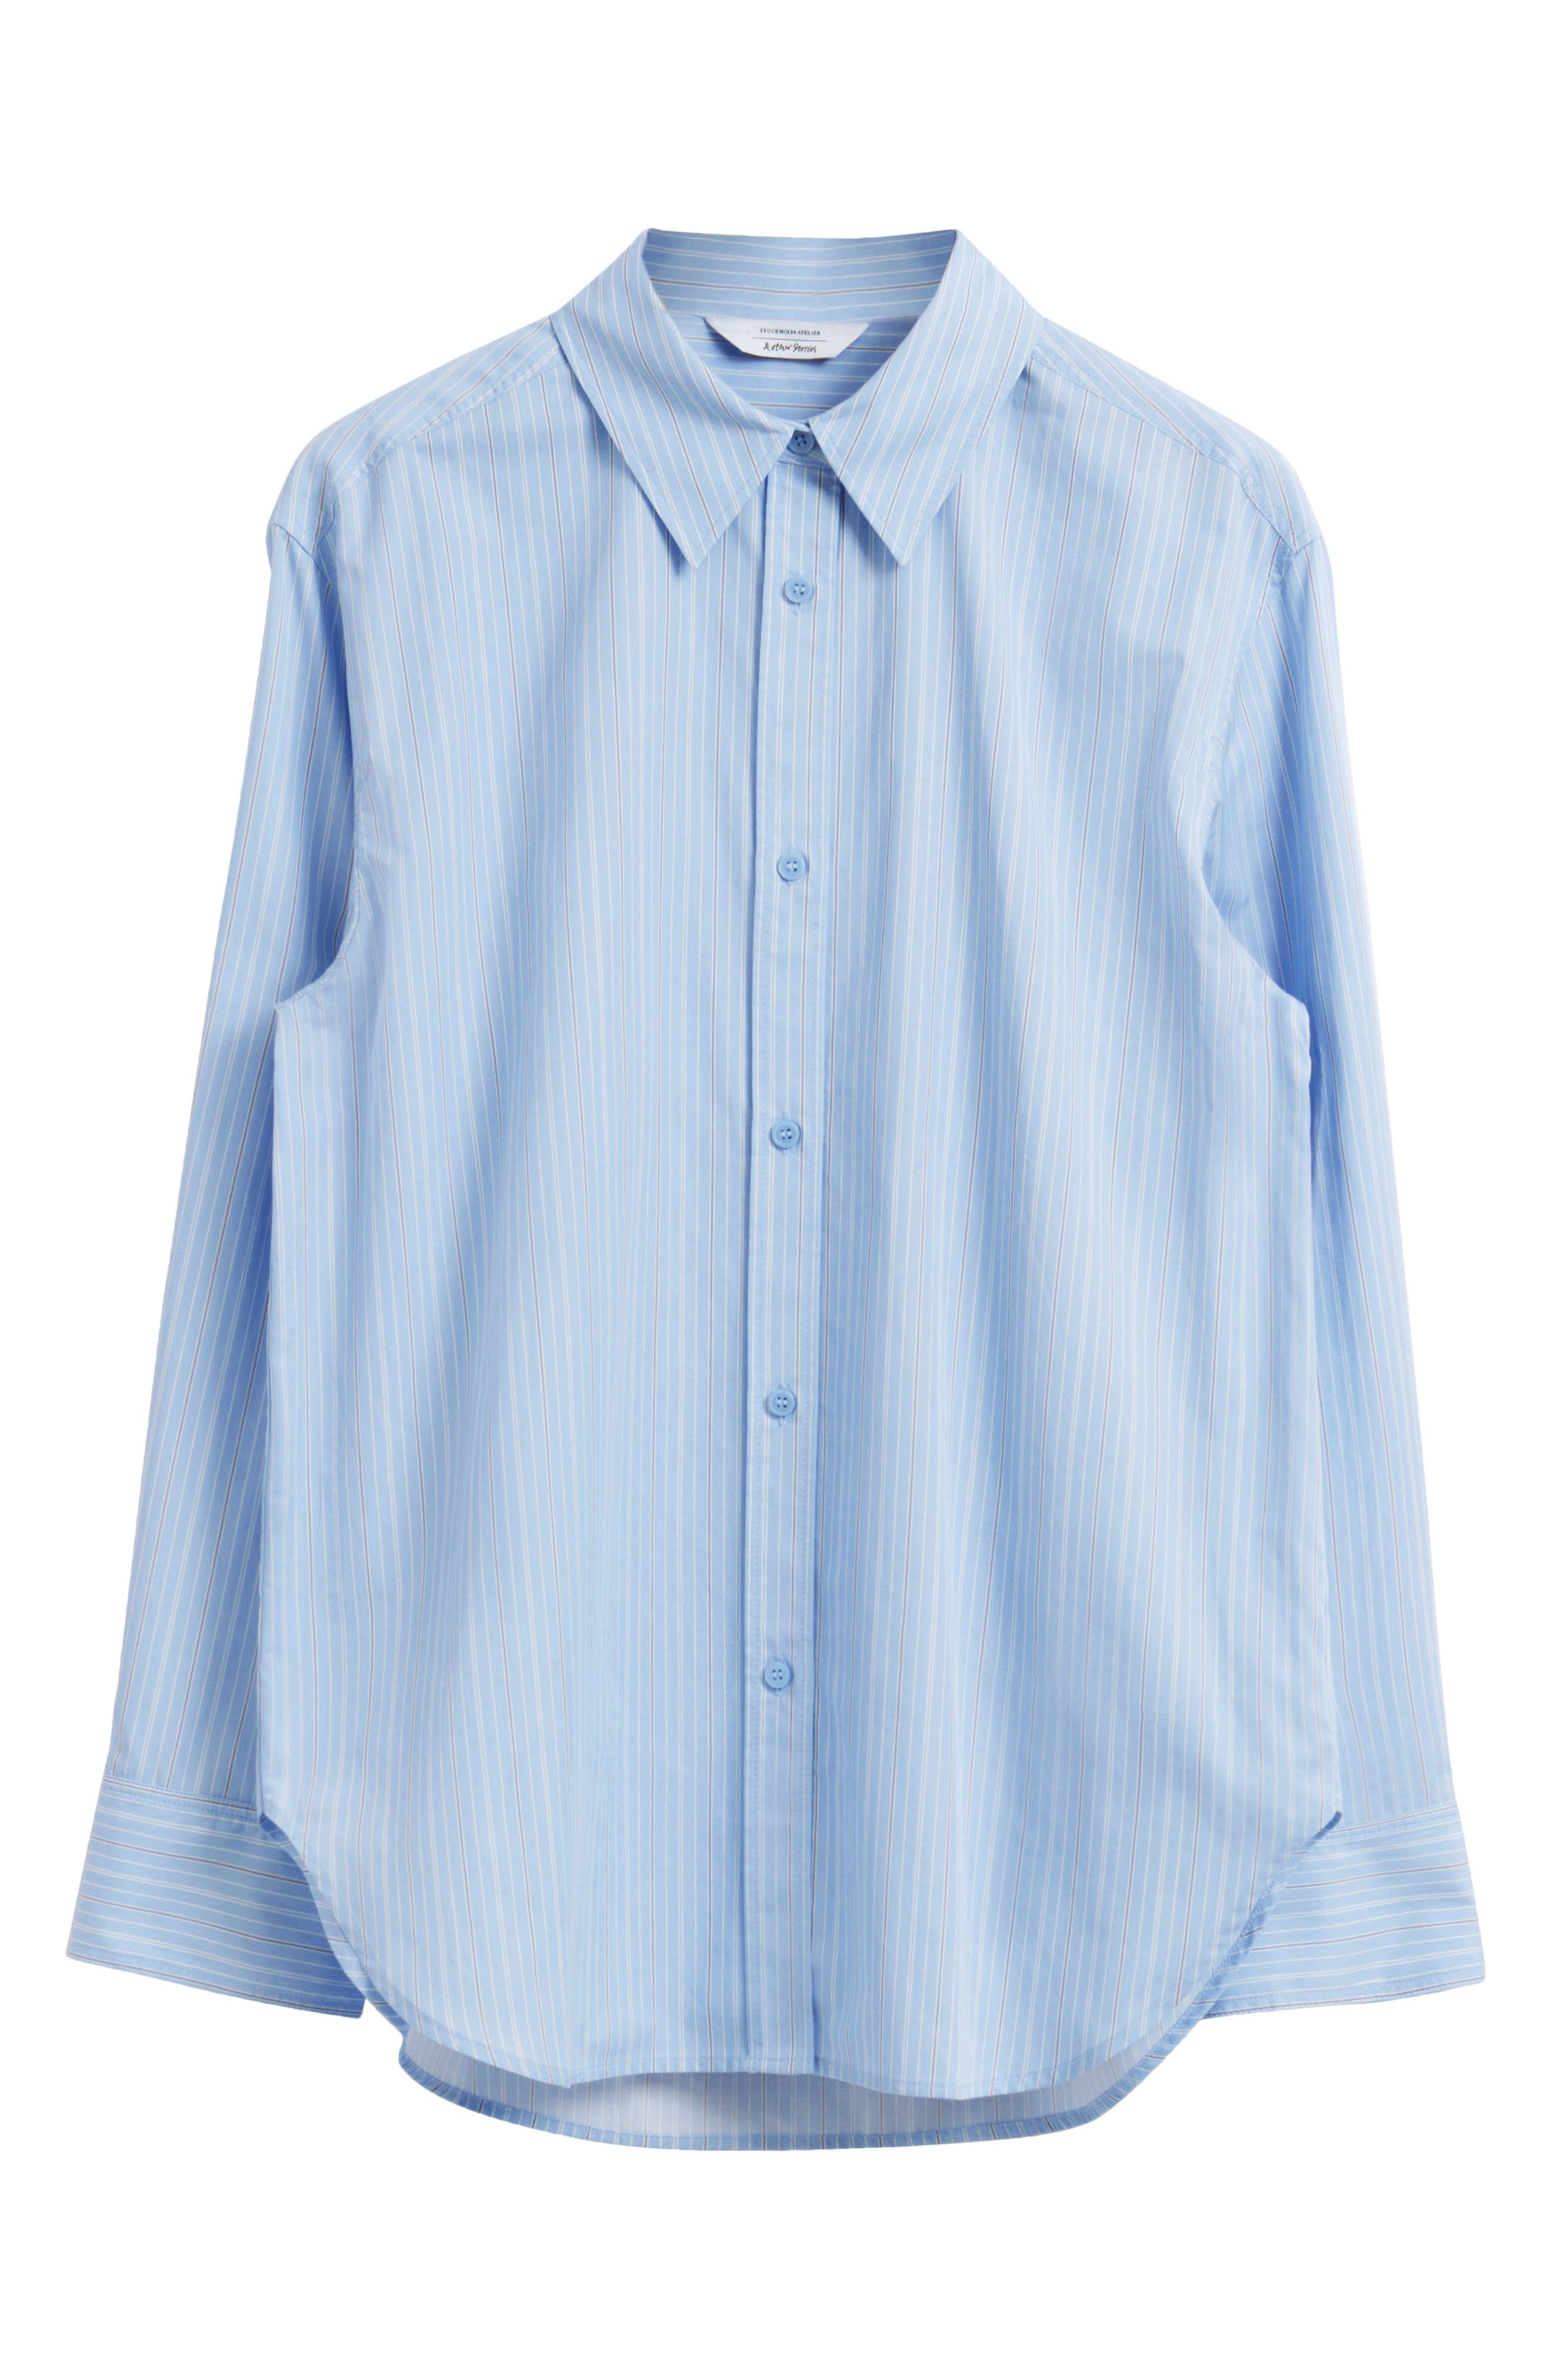 & Other Stories Stripe Long Sleeve Cotton Button-Up Shirt in Light